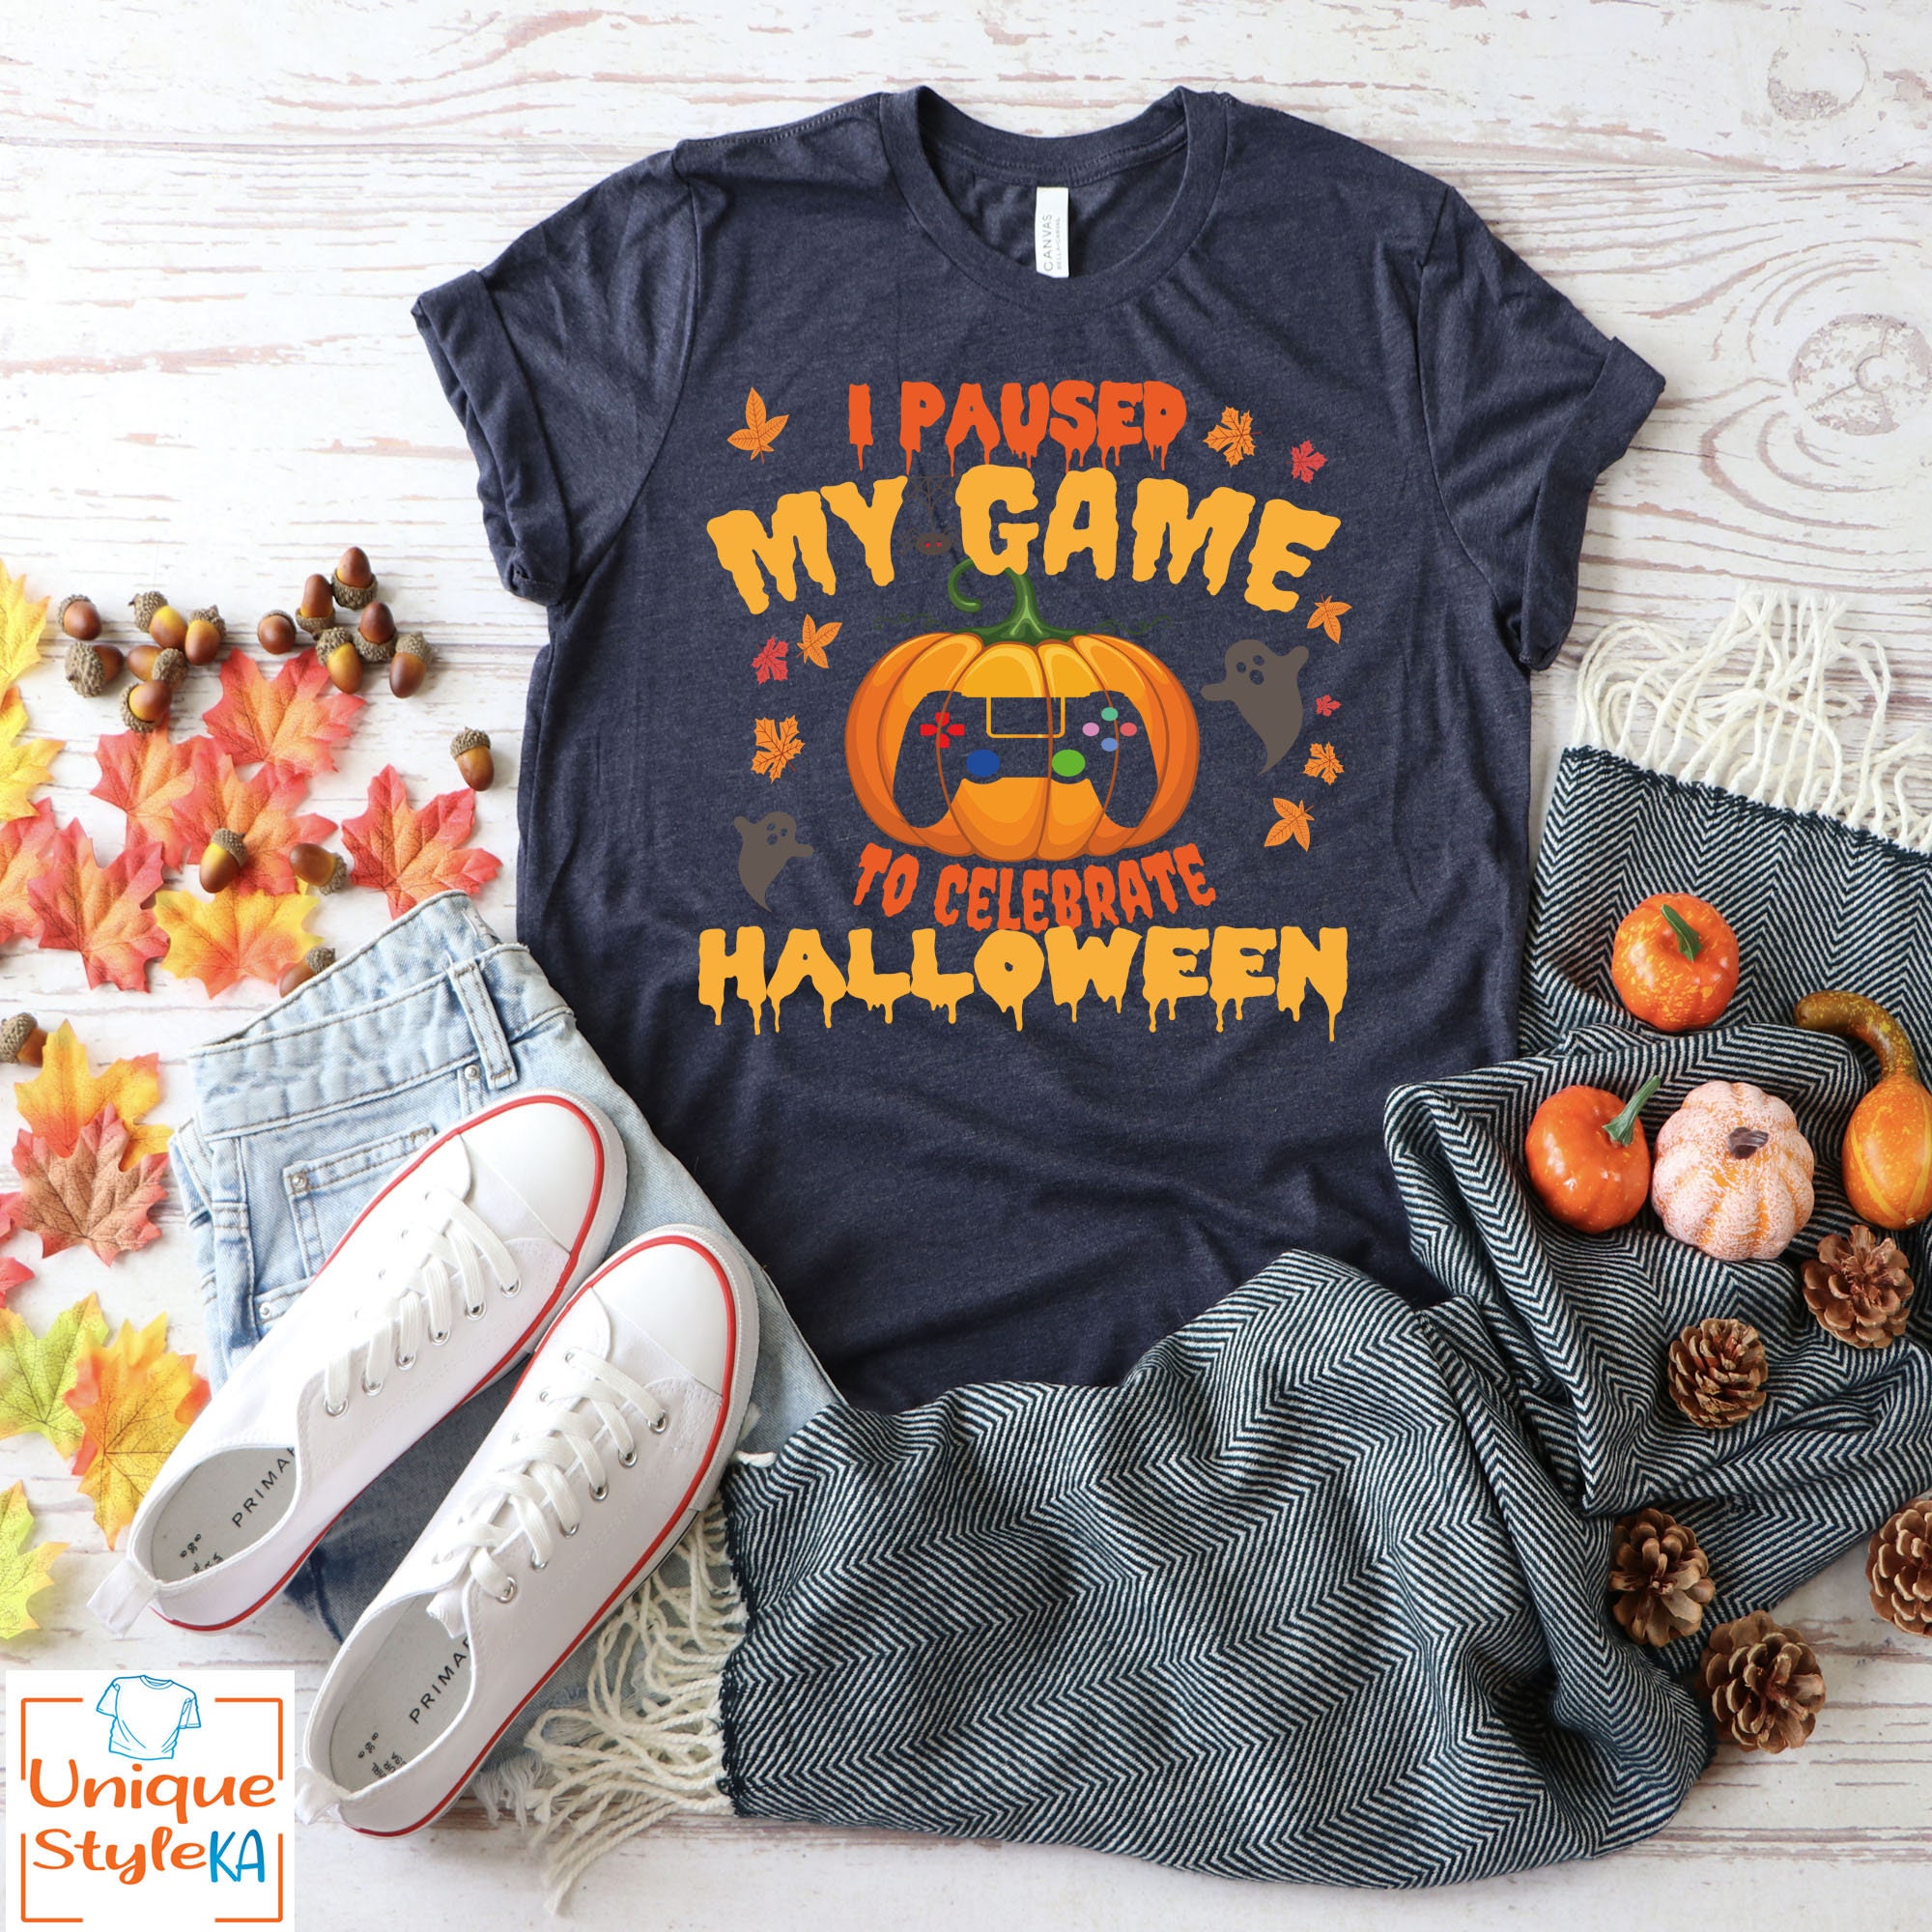 Discover I Paused My Game To Celebrate Halloween, Video Games Lover Gift, Halloween Shirt, Halloween Gamer, Funny Halloween Video Gamer Design Gift